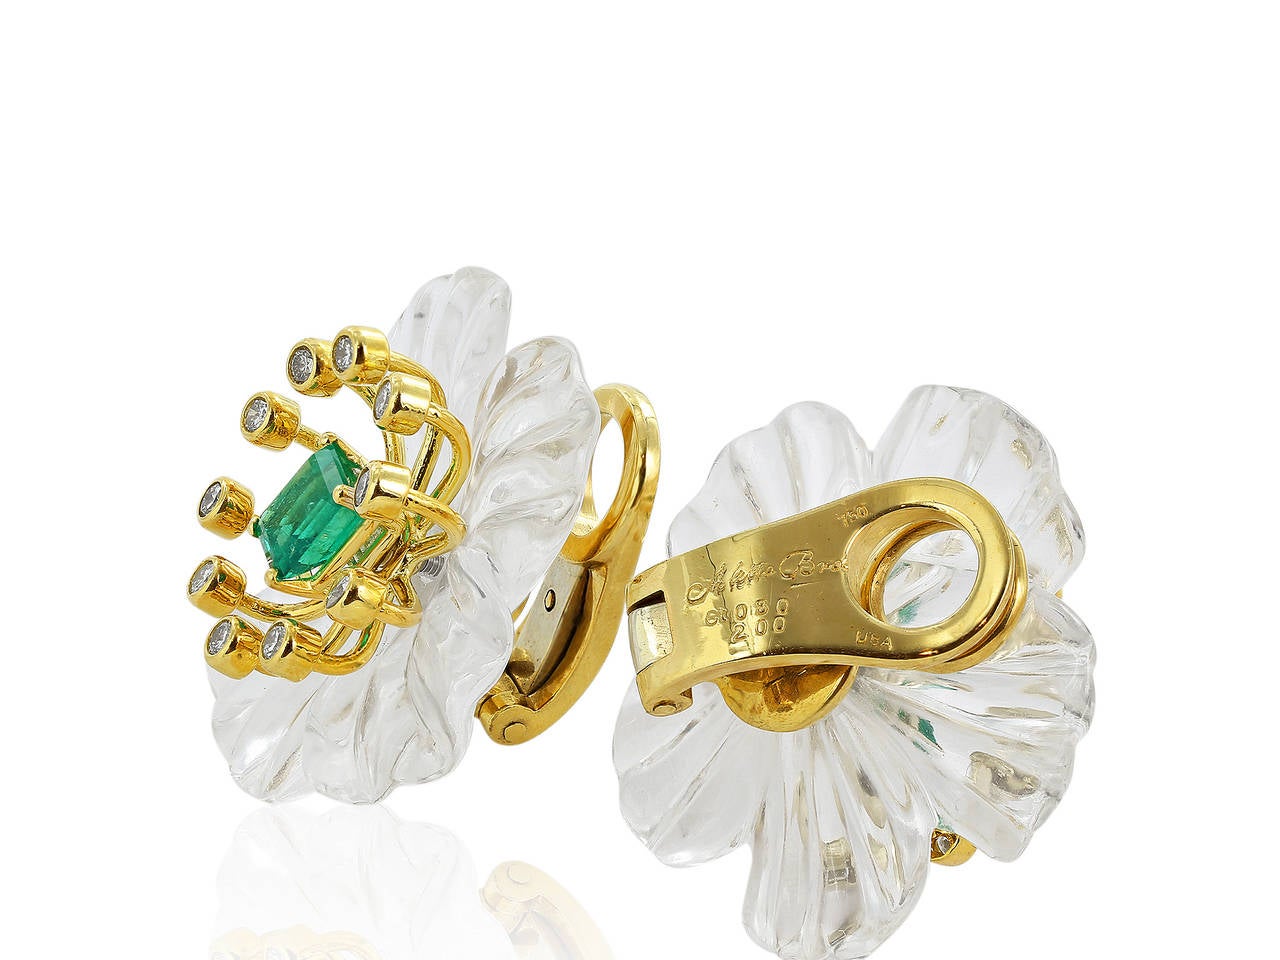 18 karat yellow gold carved crystal floral motif earrings consisting of 2 emerald cut emerald having a total weight if 2.00 carats total weight set with 20 bezel set round brilliant cut diamonds having a total weight of .80 carats, signed Aletto